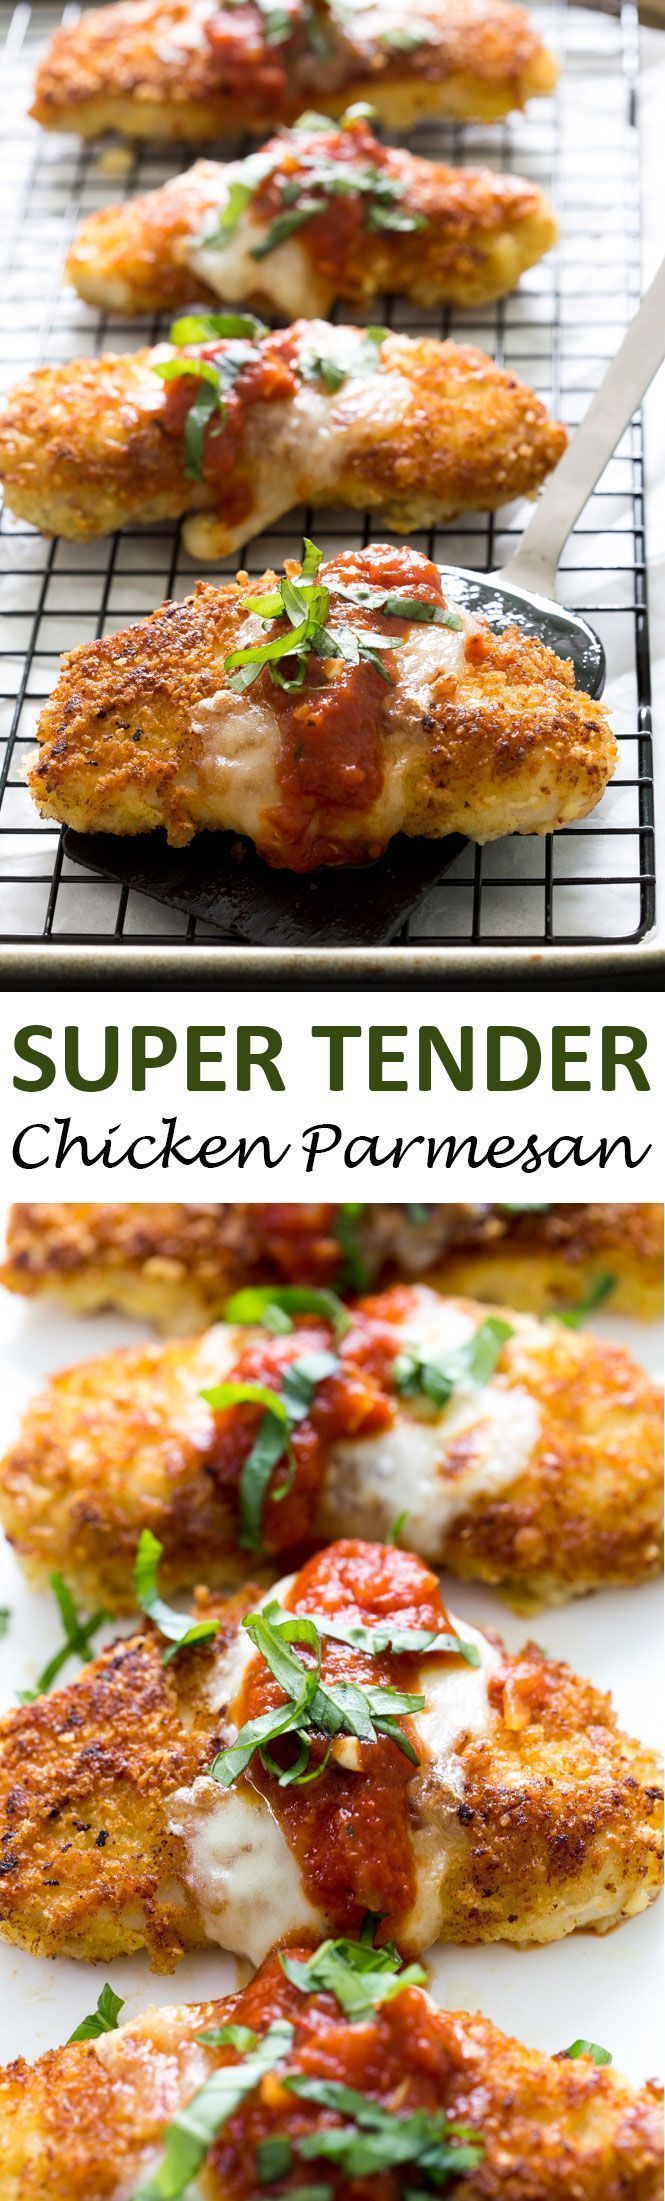 The BEST Chicken Parmesan. A quick and easy 30 minute weeknight meal everyone will